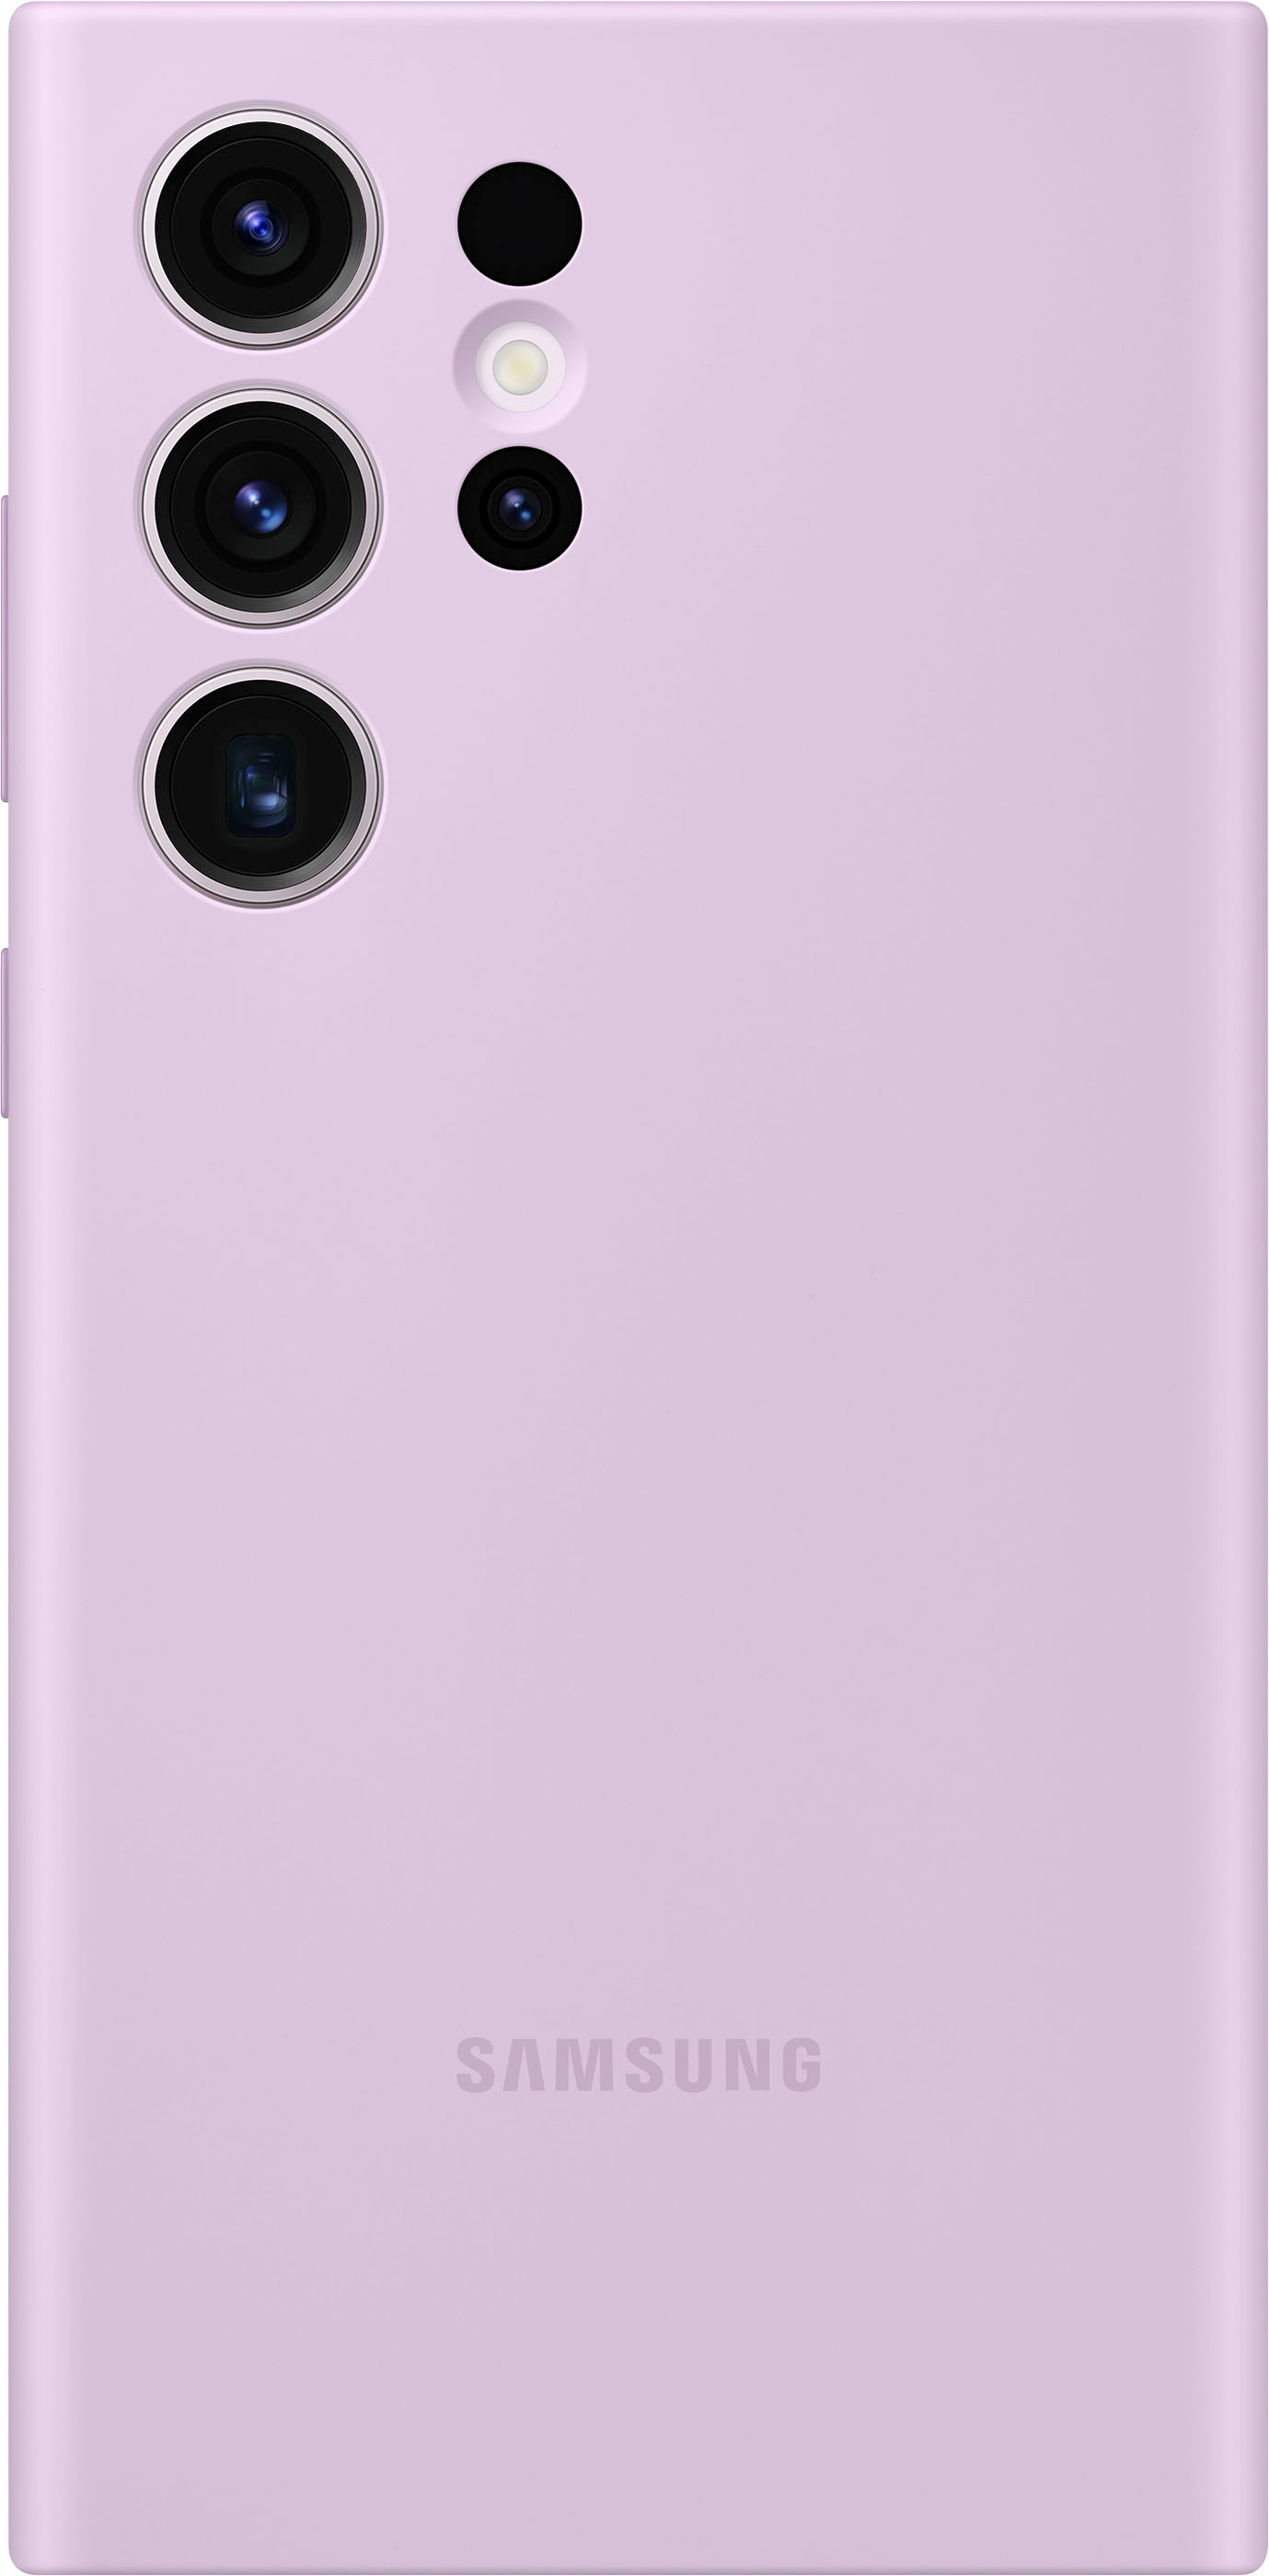 Casetego for Samsung Galaxy S23 Ultra Case,Heavy Duty Shockproof Protection  Phone Cover for Women Girls,Light Purple